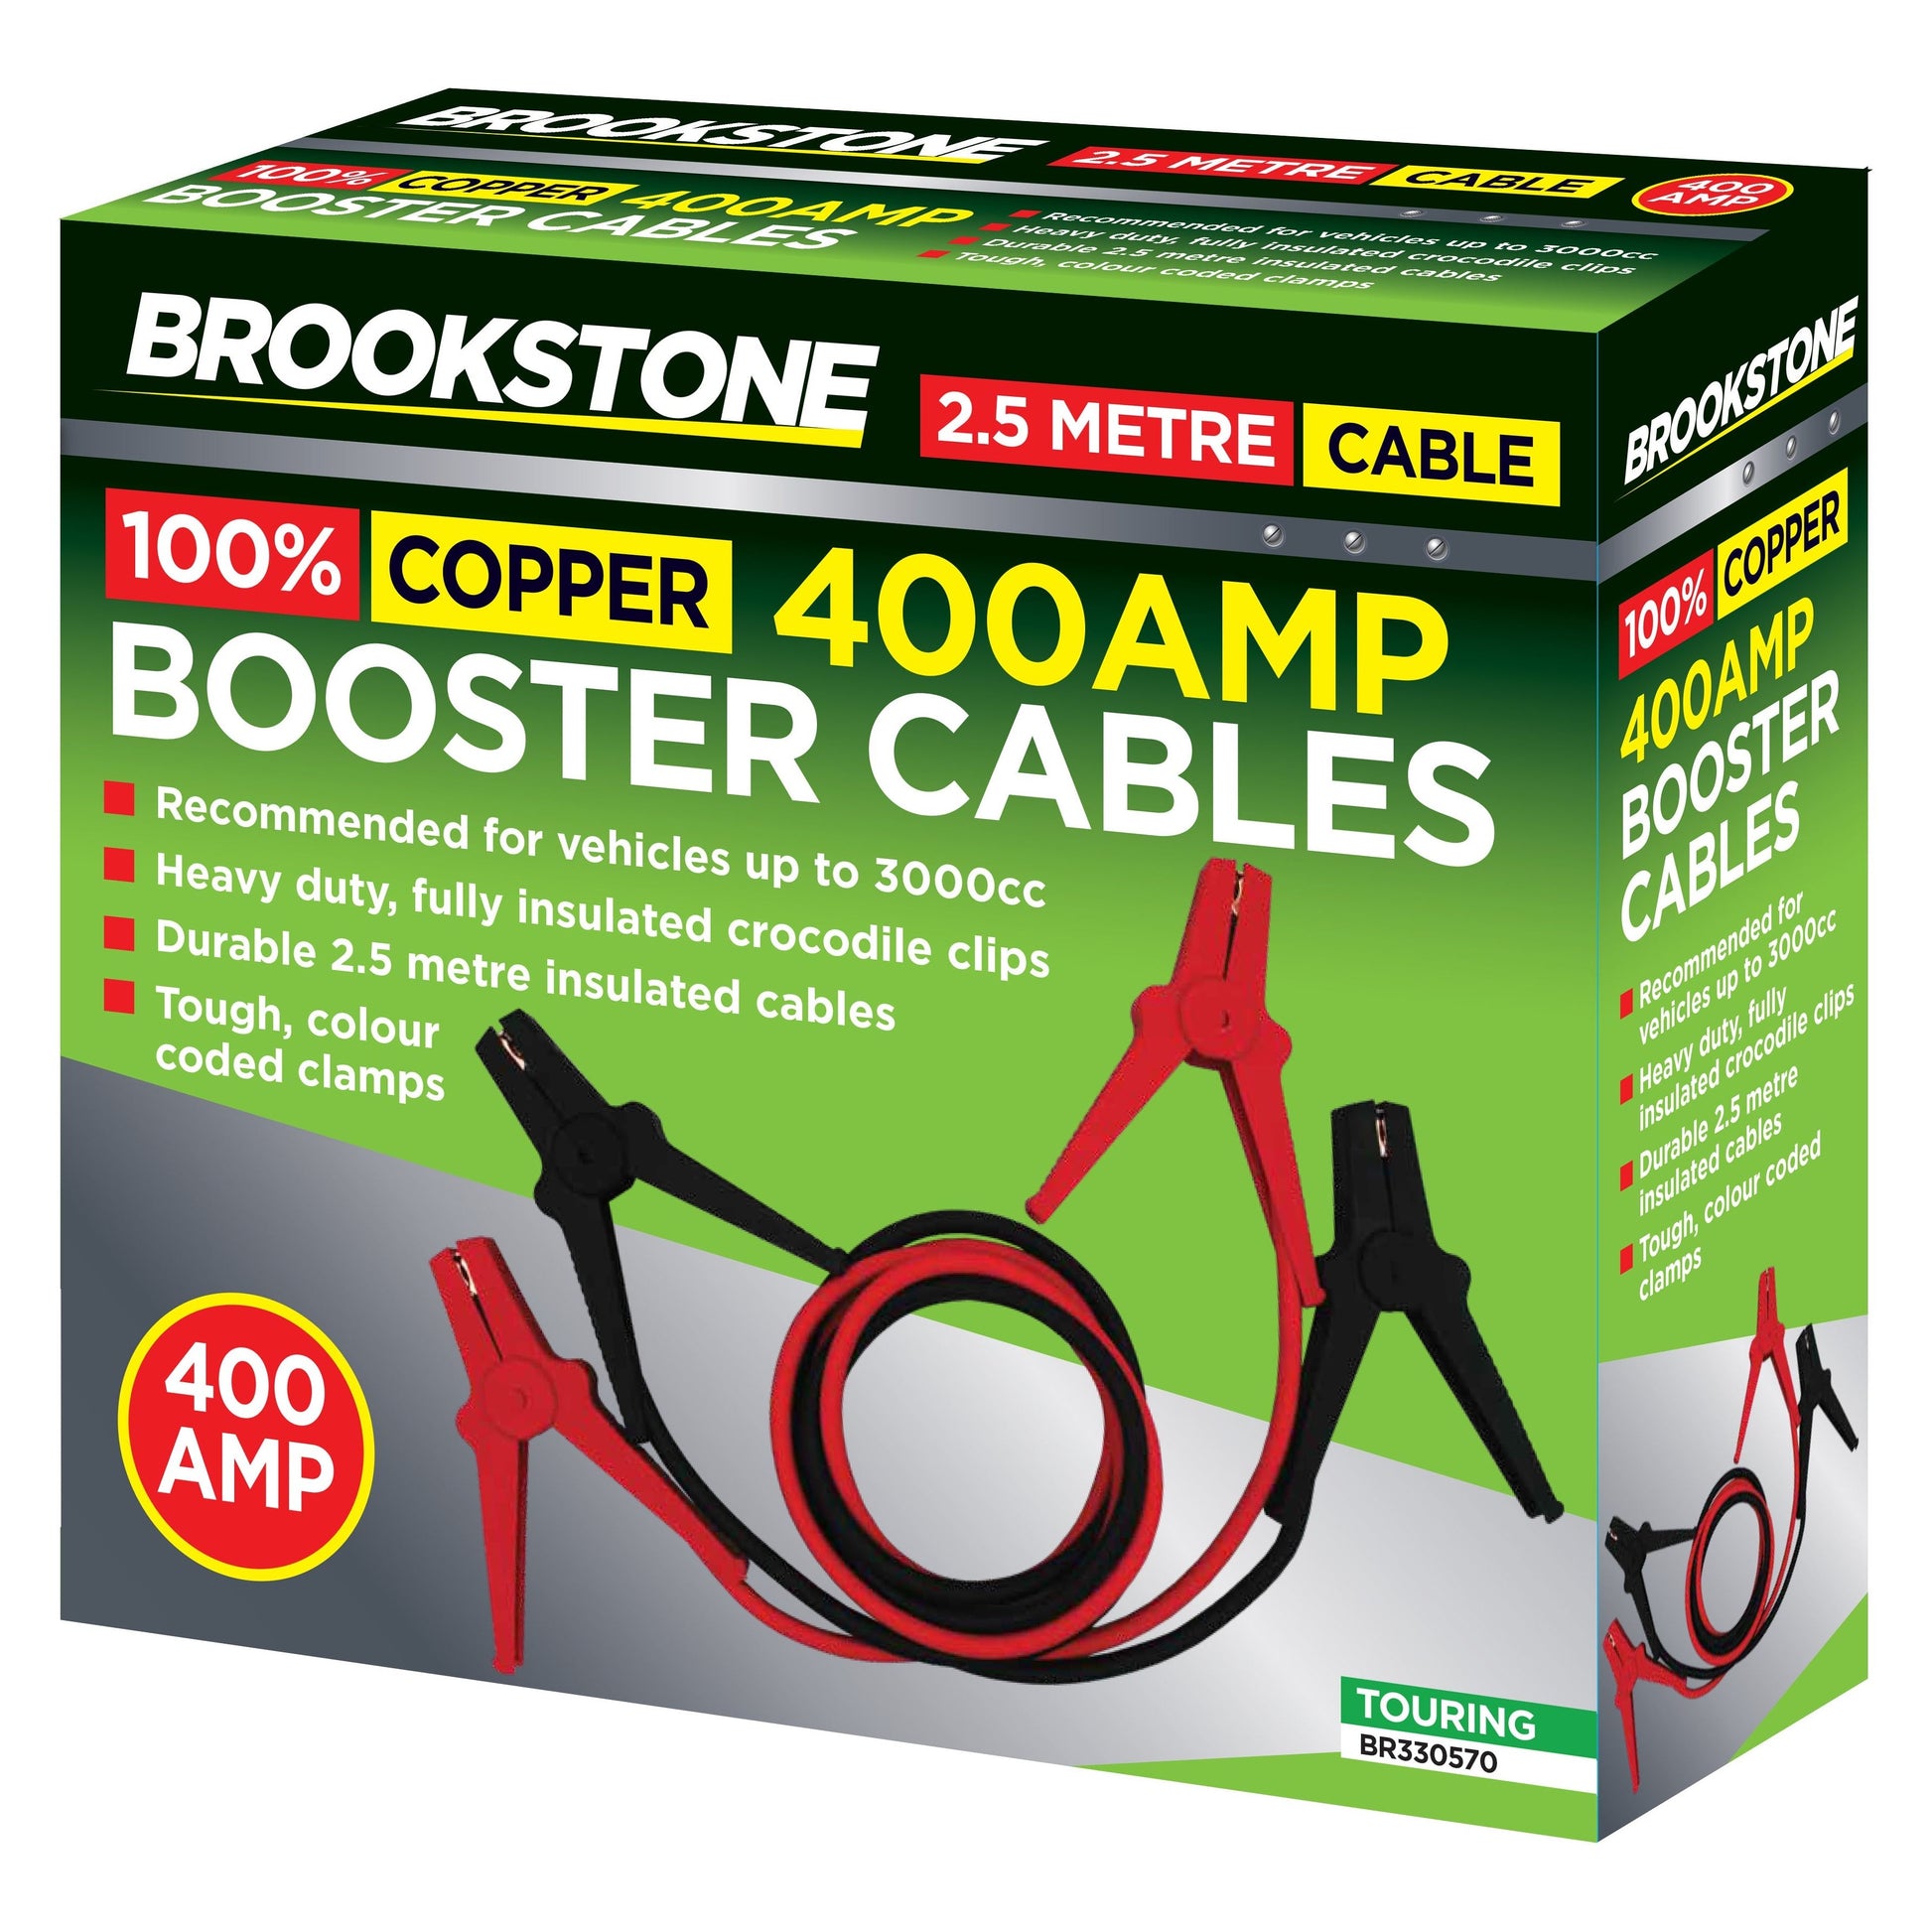 Brookstone 400AMP Booster Cable